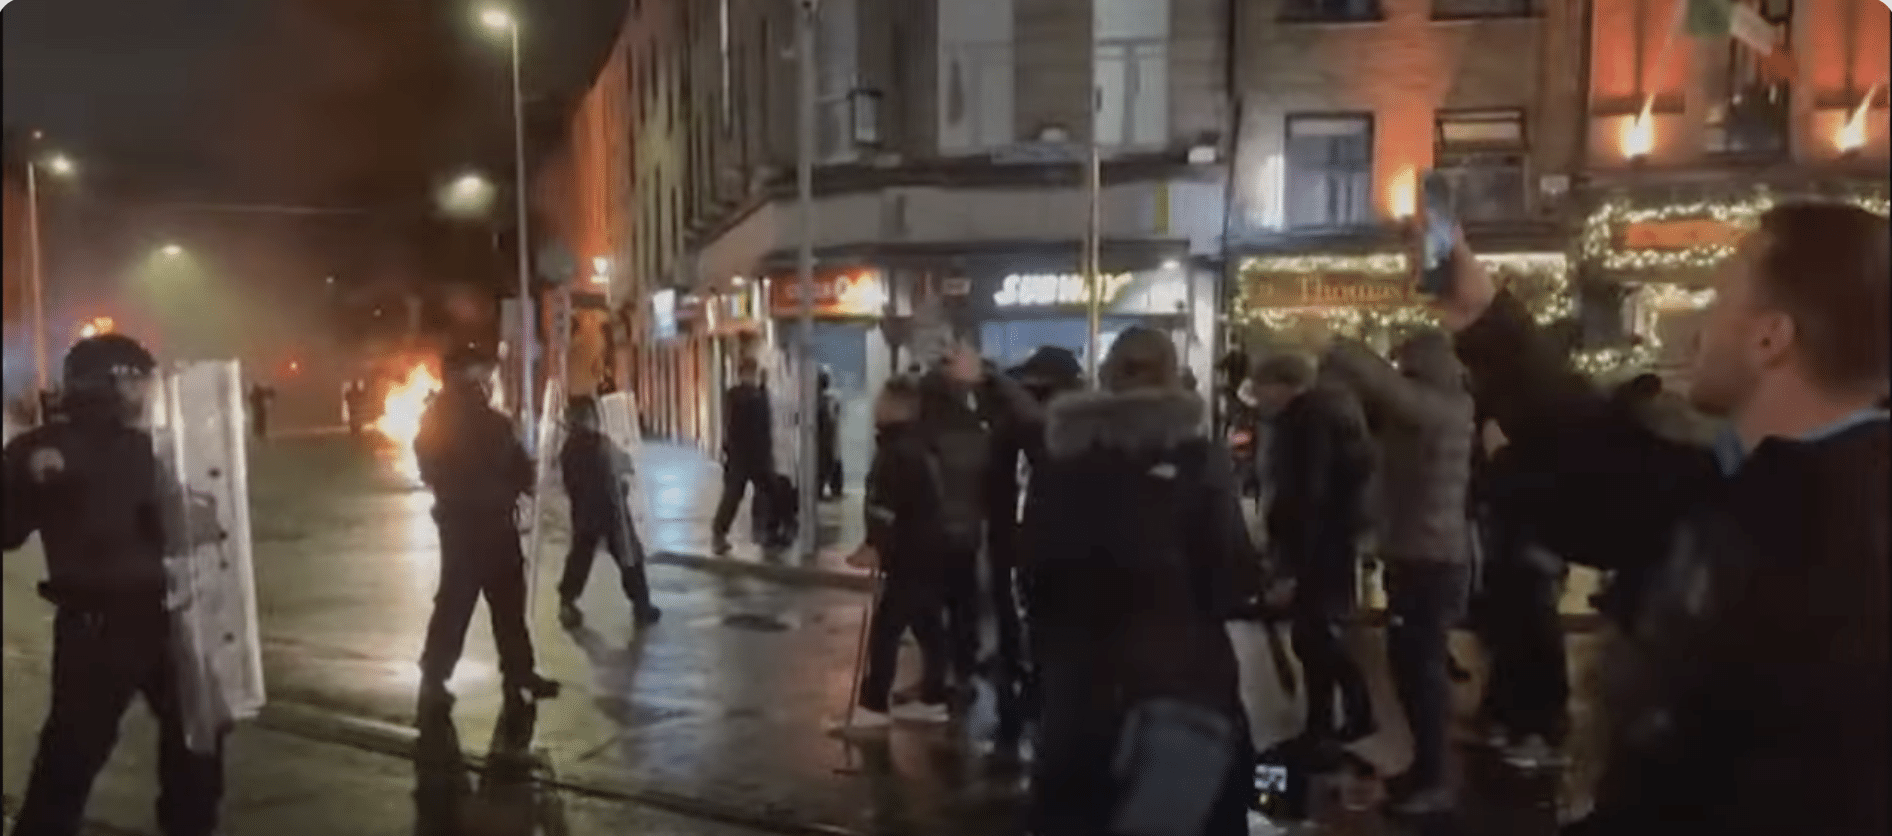 (WATCH) Anti-immigration riots erupt in Dublin after ‘foreign national’ stabs three young children